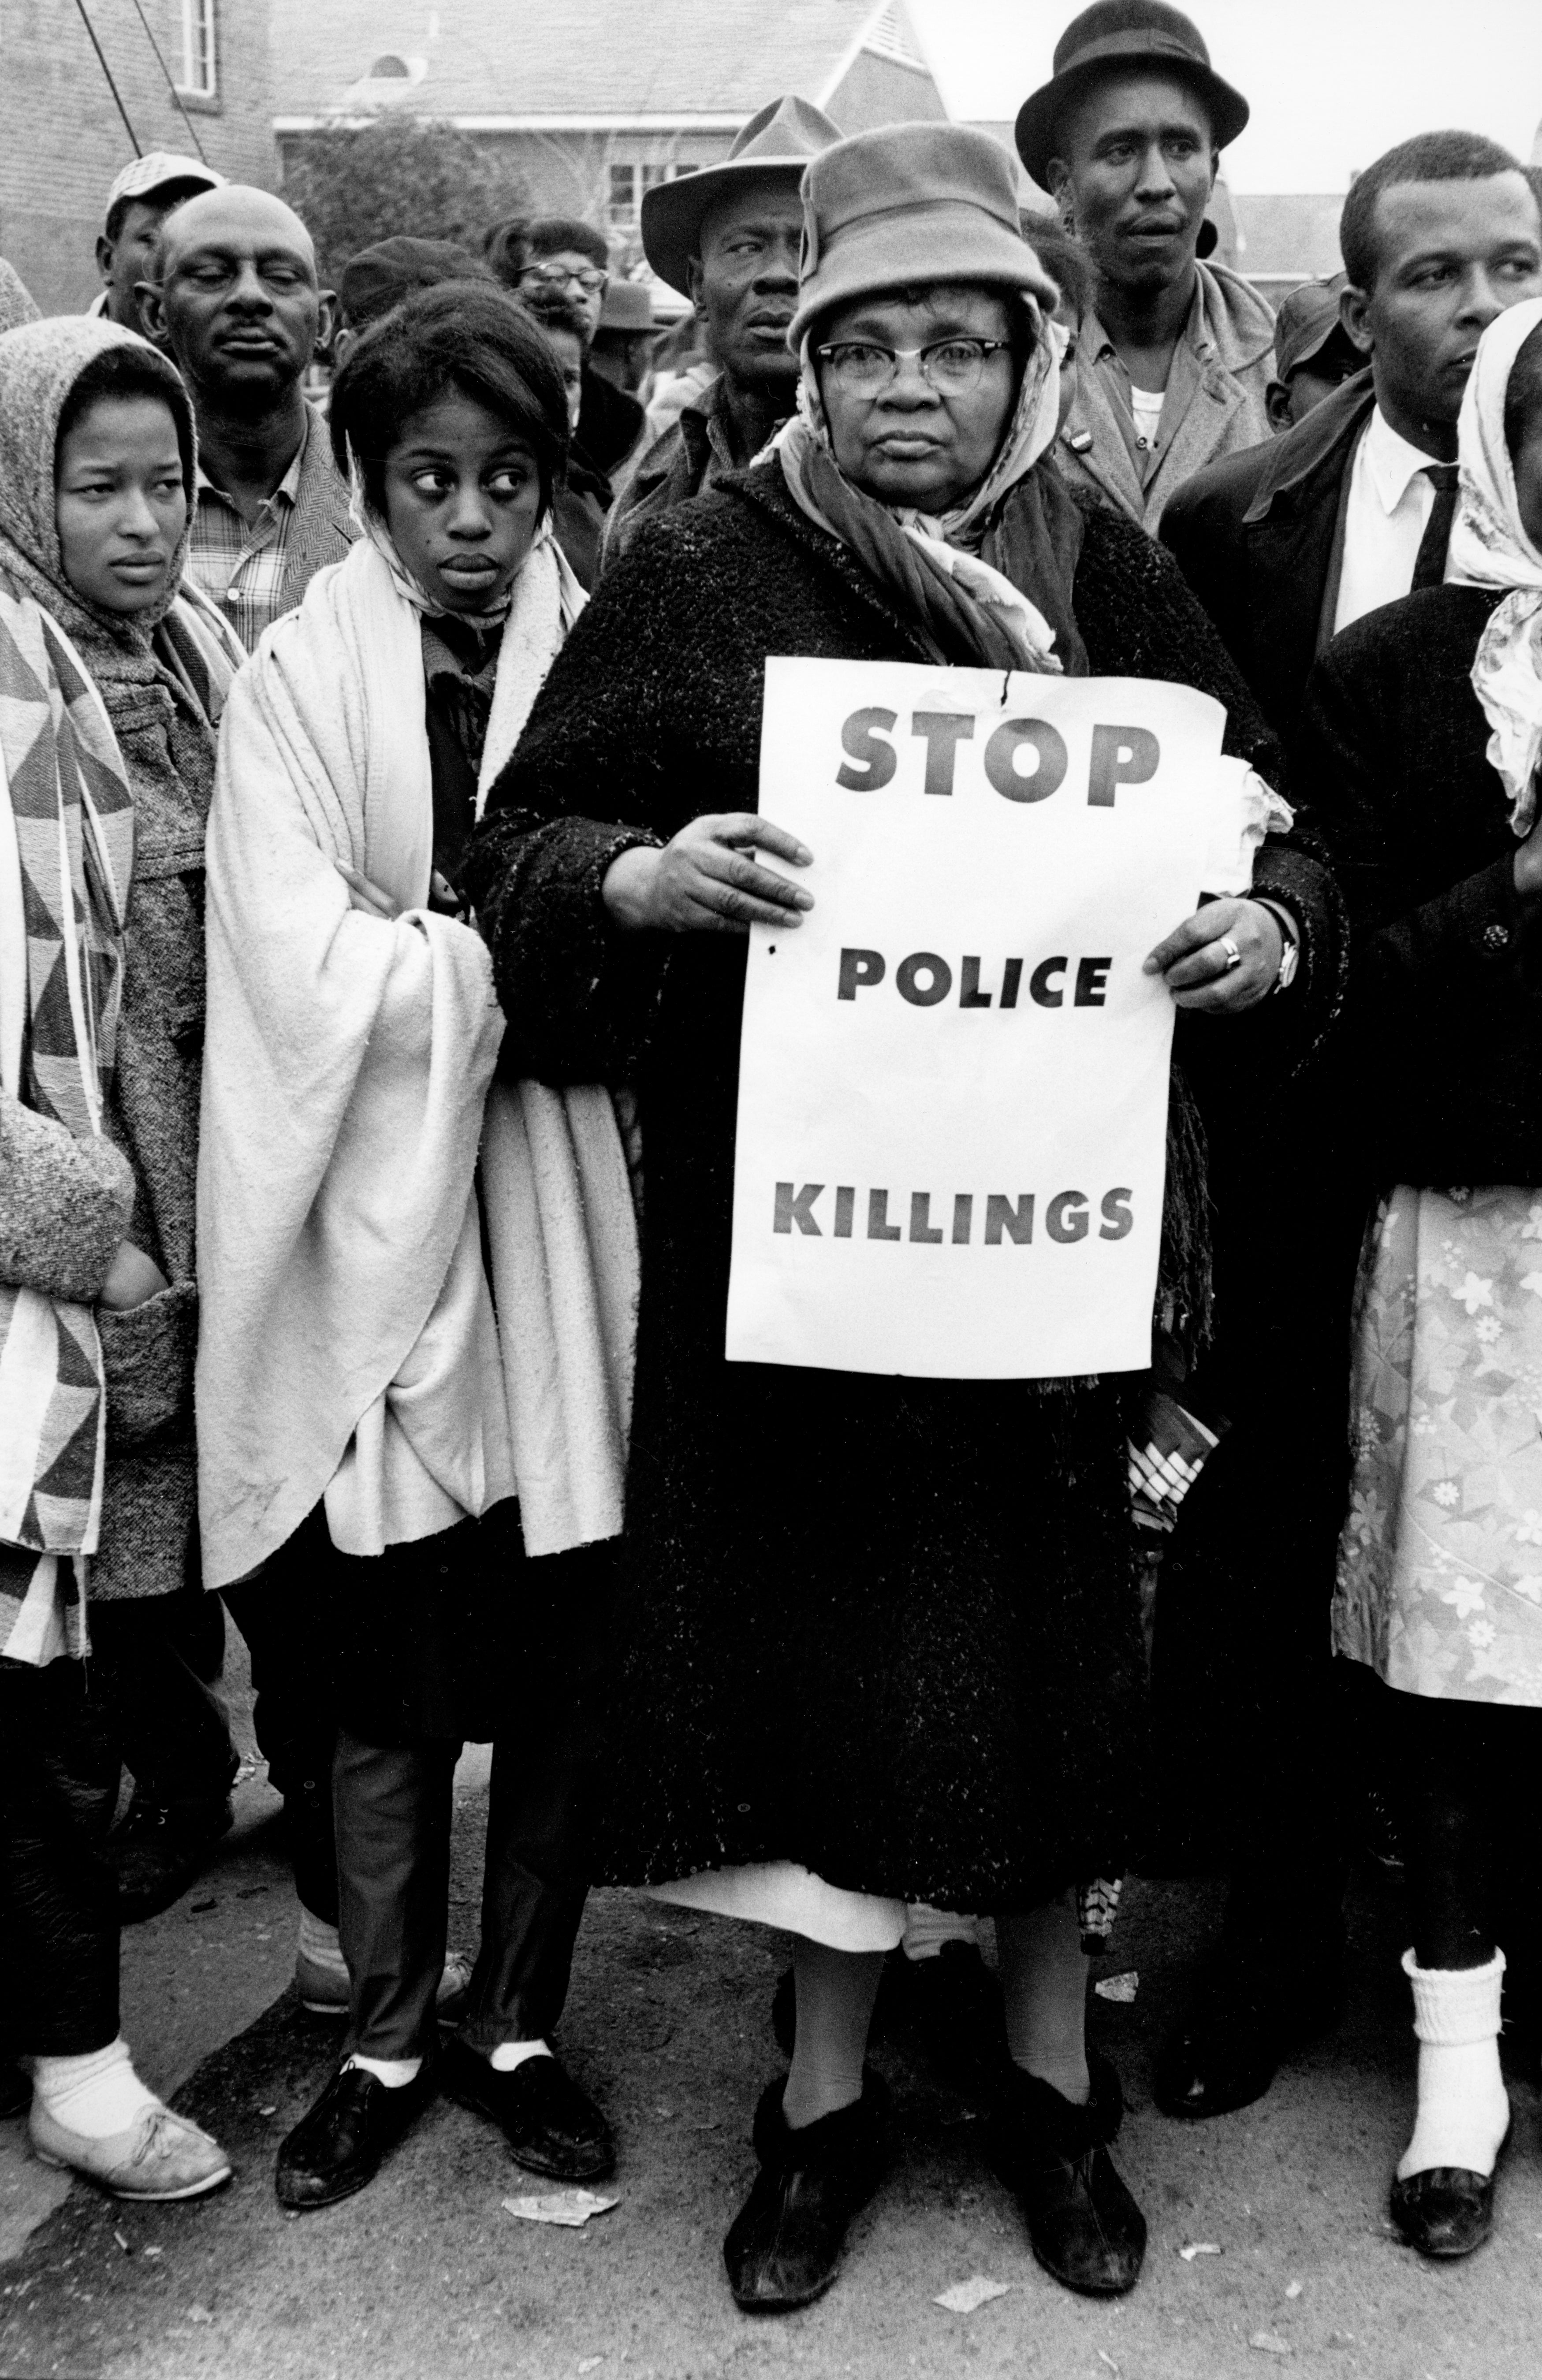 POSTER at a Selma-to-Montgomery march in 1965 protested the killings of Black people by police.